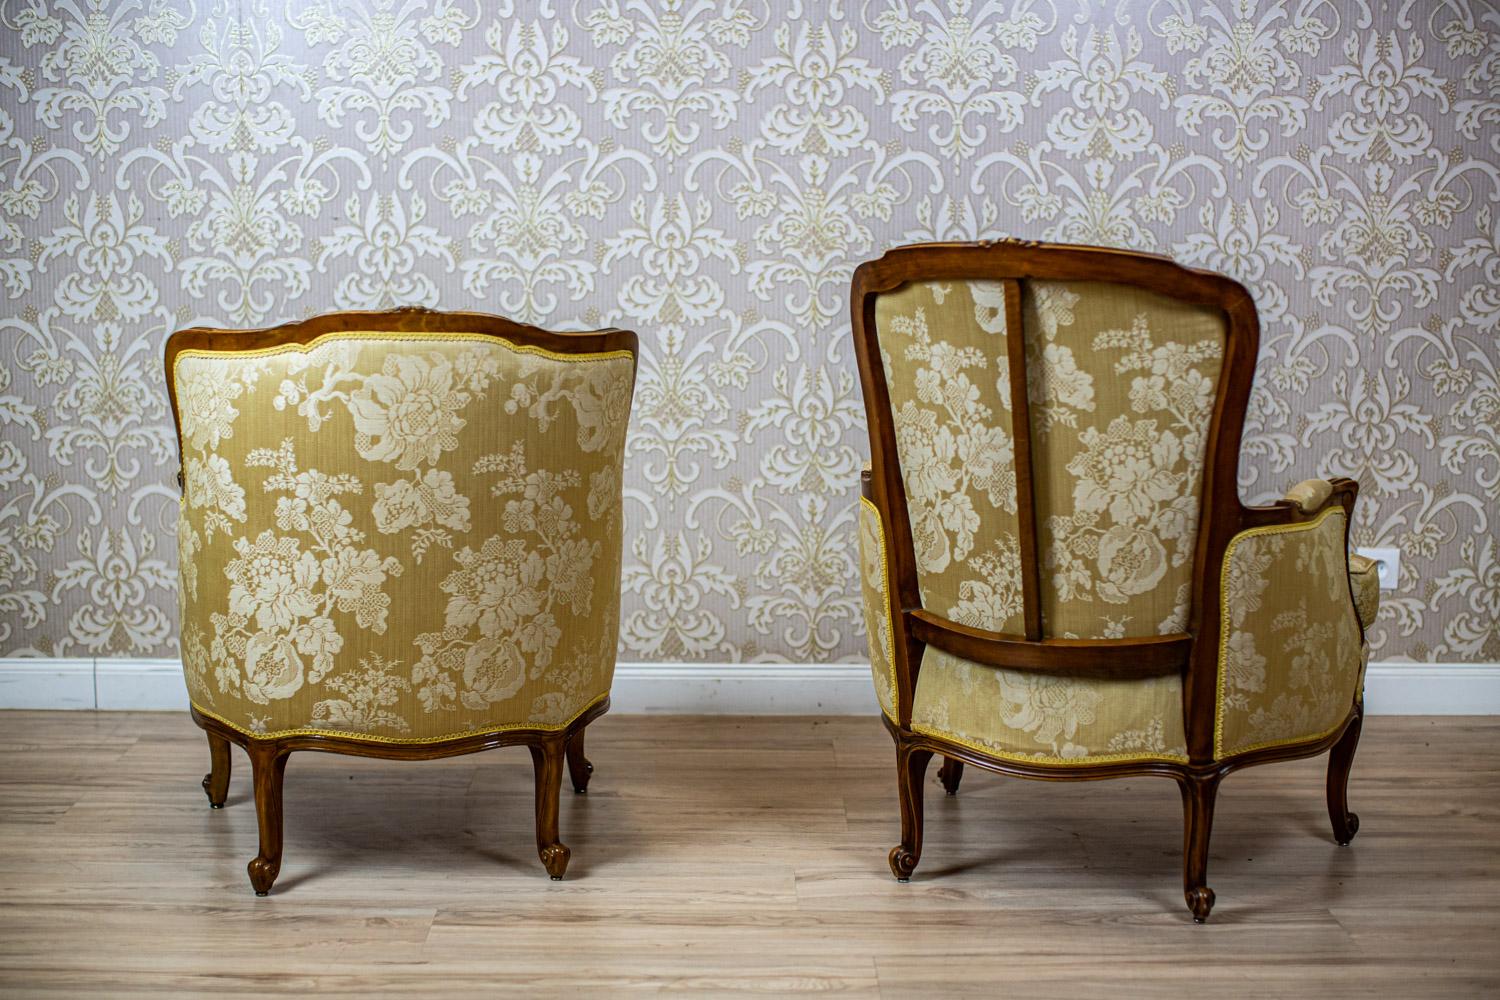 European Pair of Stylized Walnut Armchairs From the 1930s in Floral Upholstery